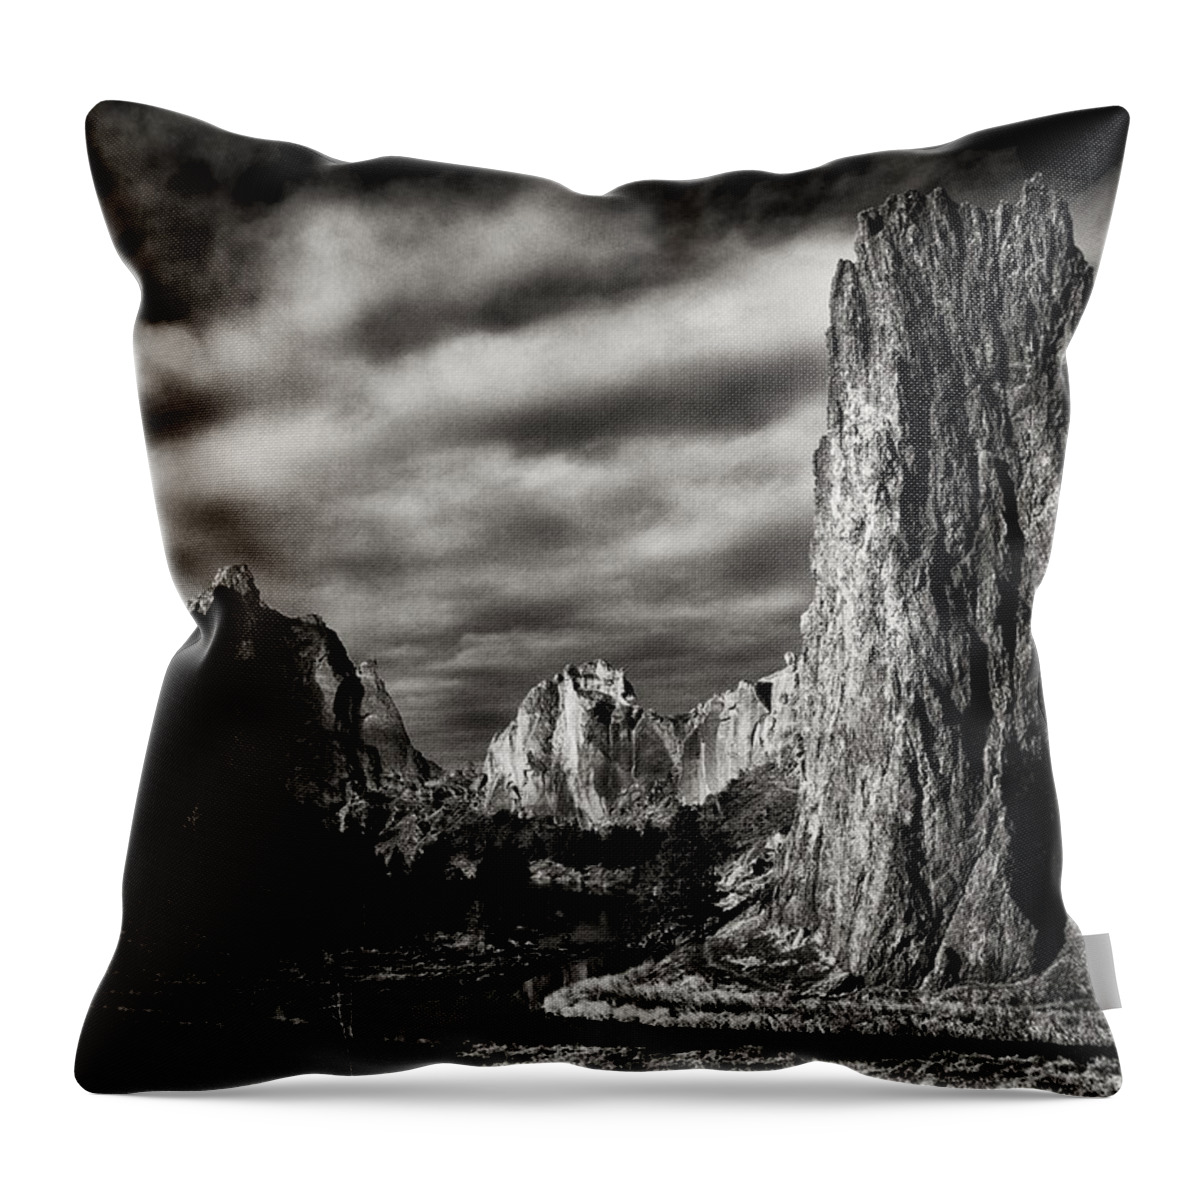 Smith Rock Throw Pillow featuring the photograph Smith Rock State Park 1 by Robert Woodward